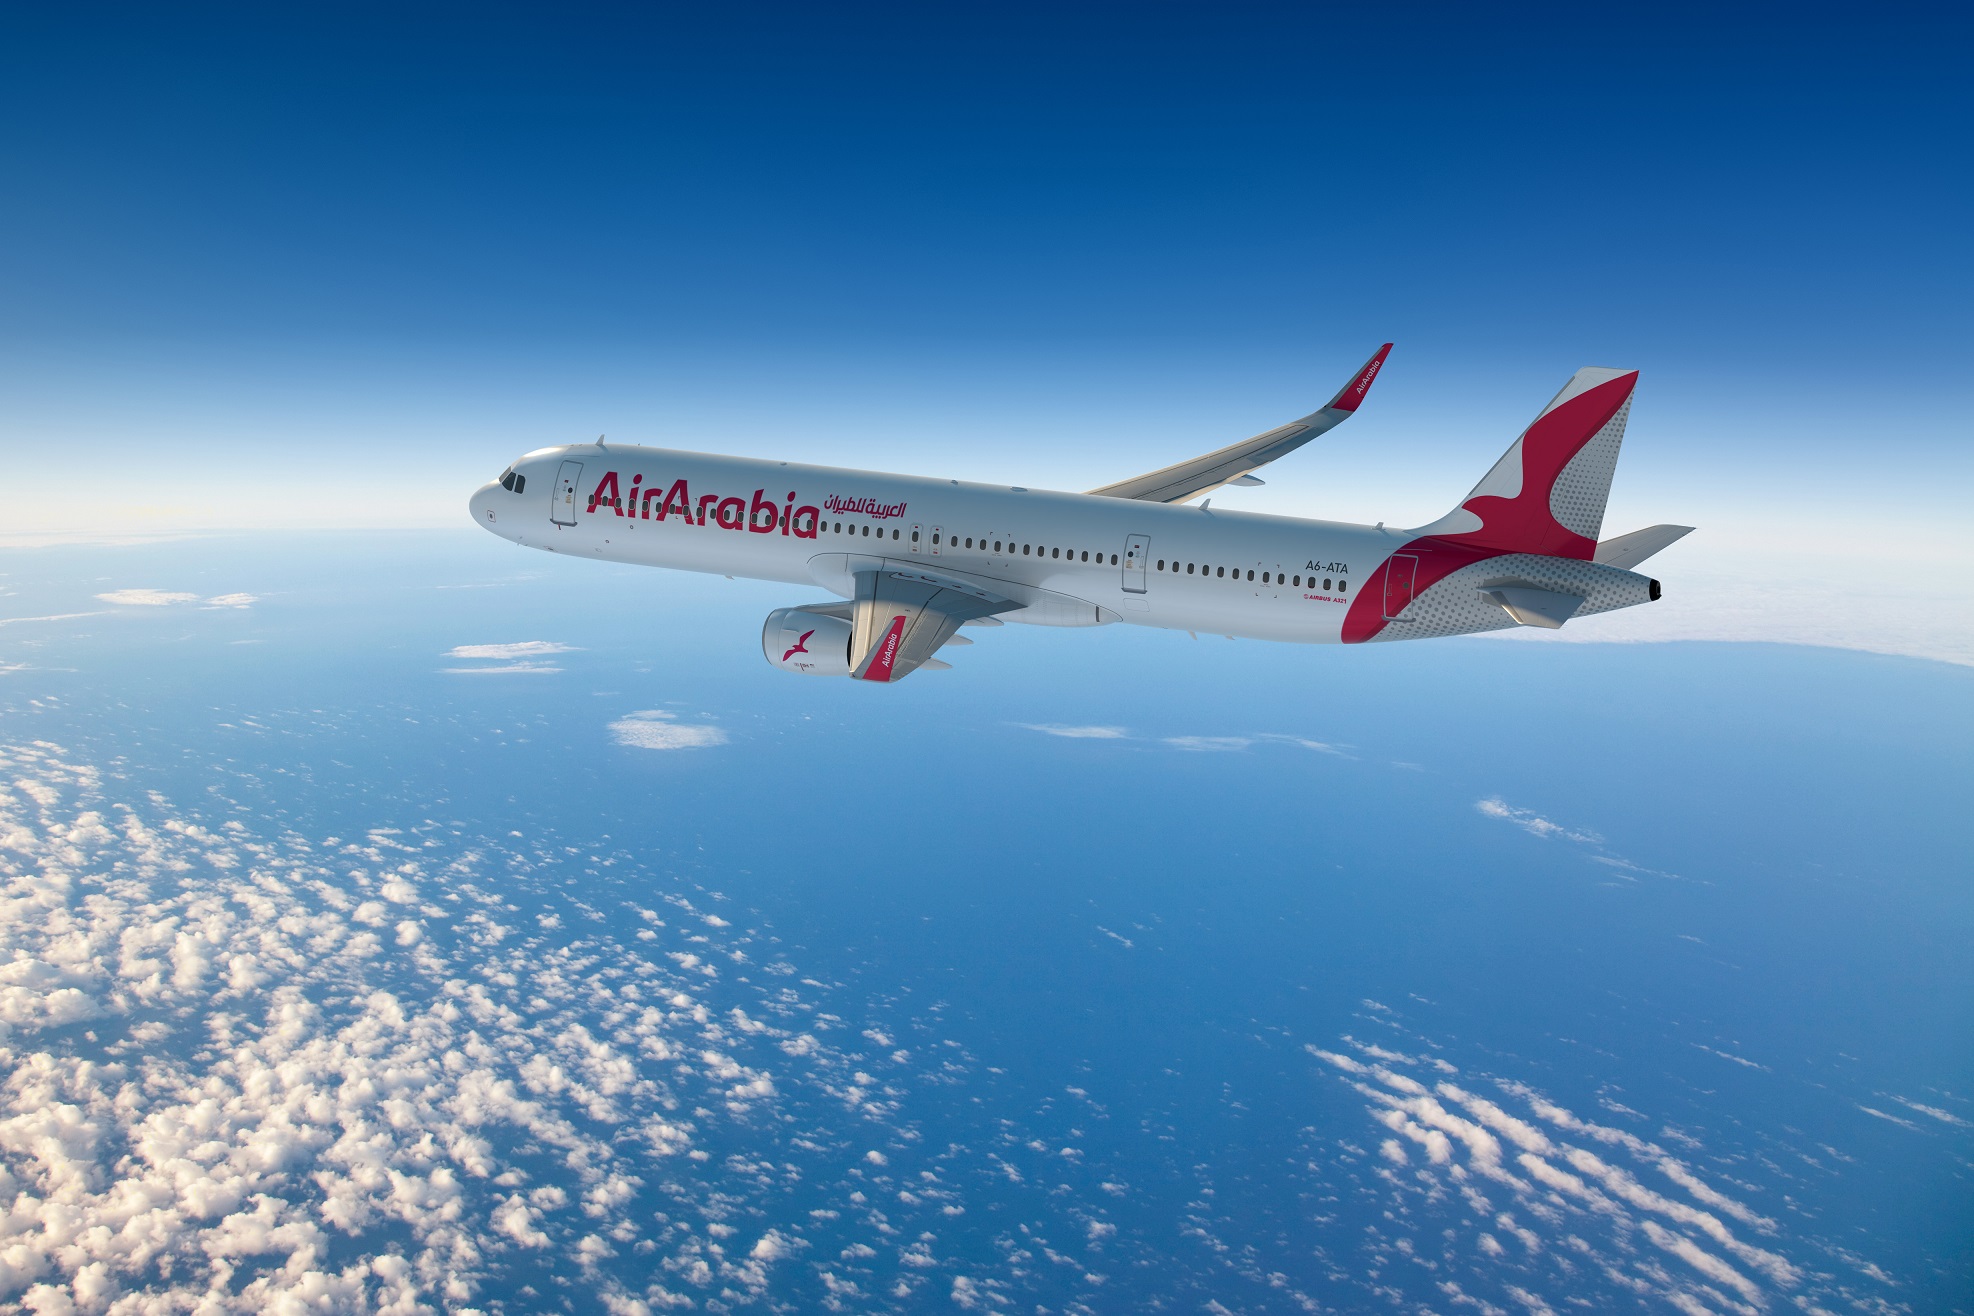 Air Arabia reports first quarter 2022 net profit of AED 291 million